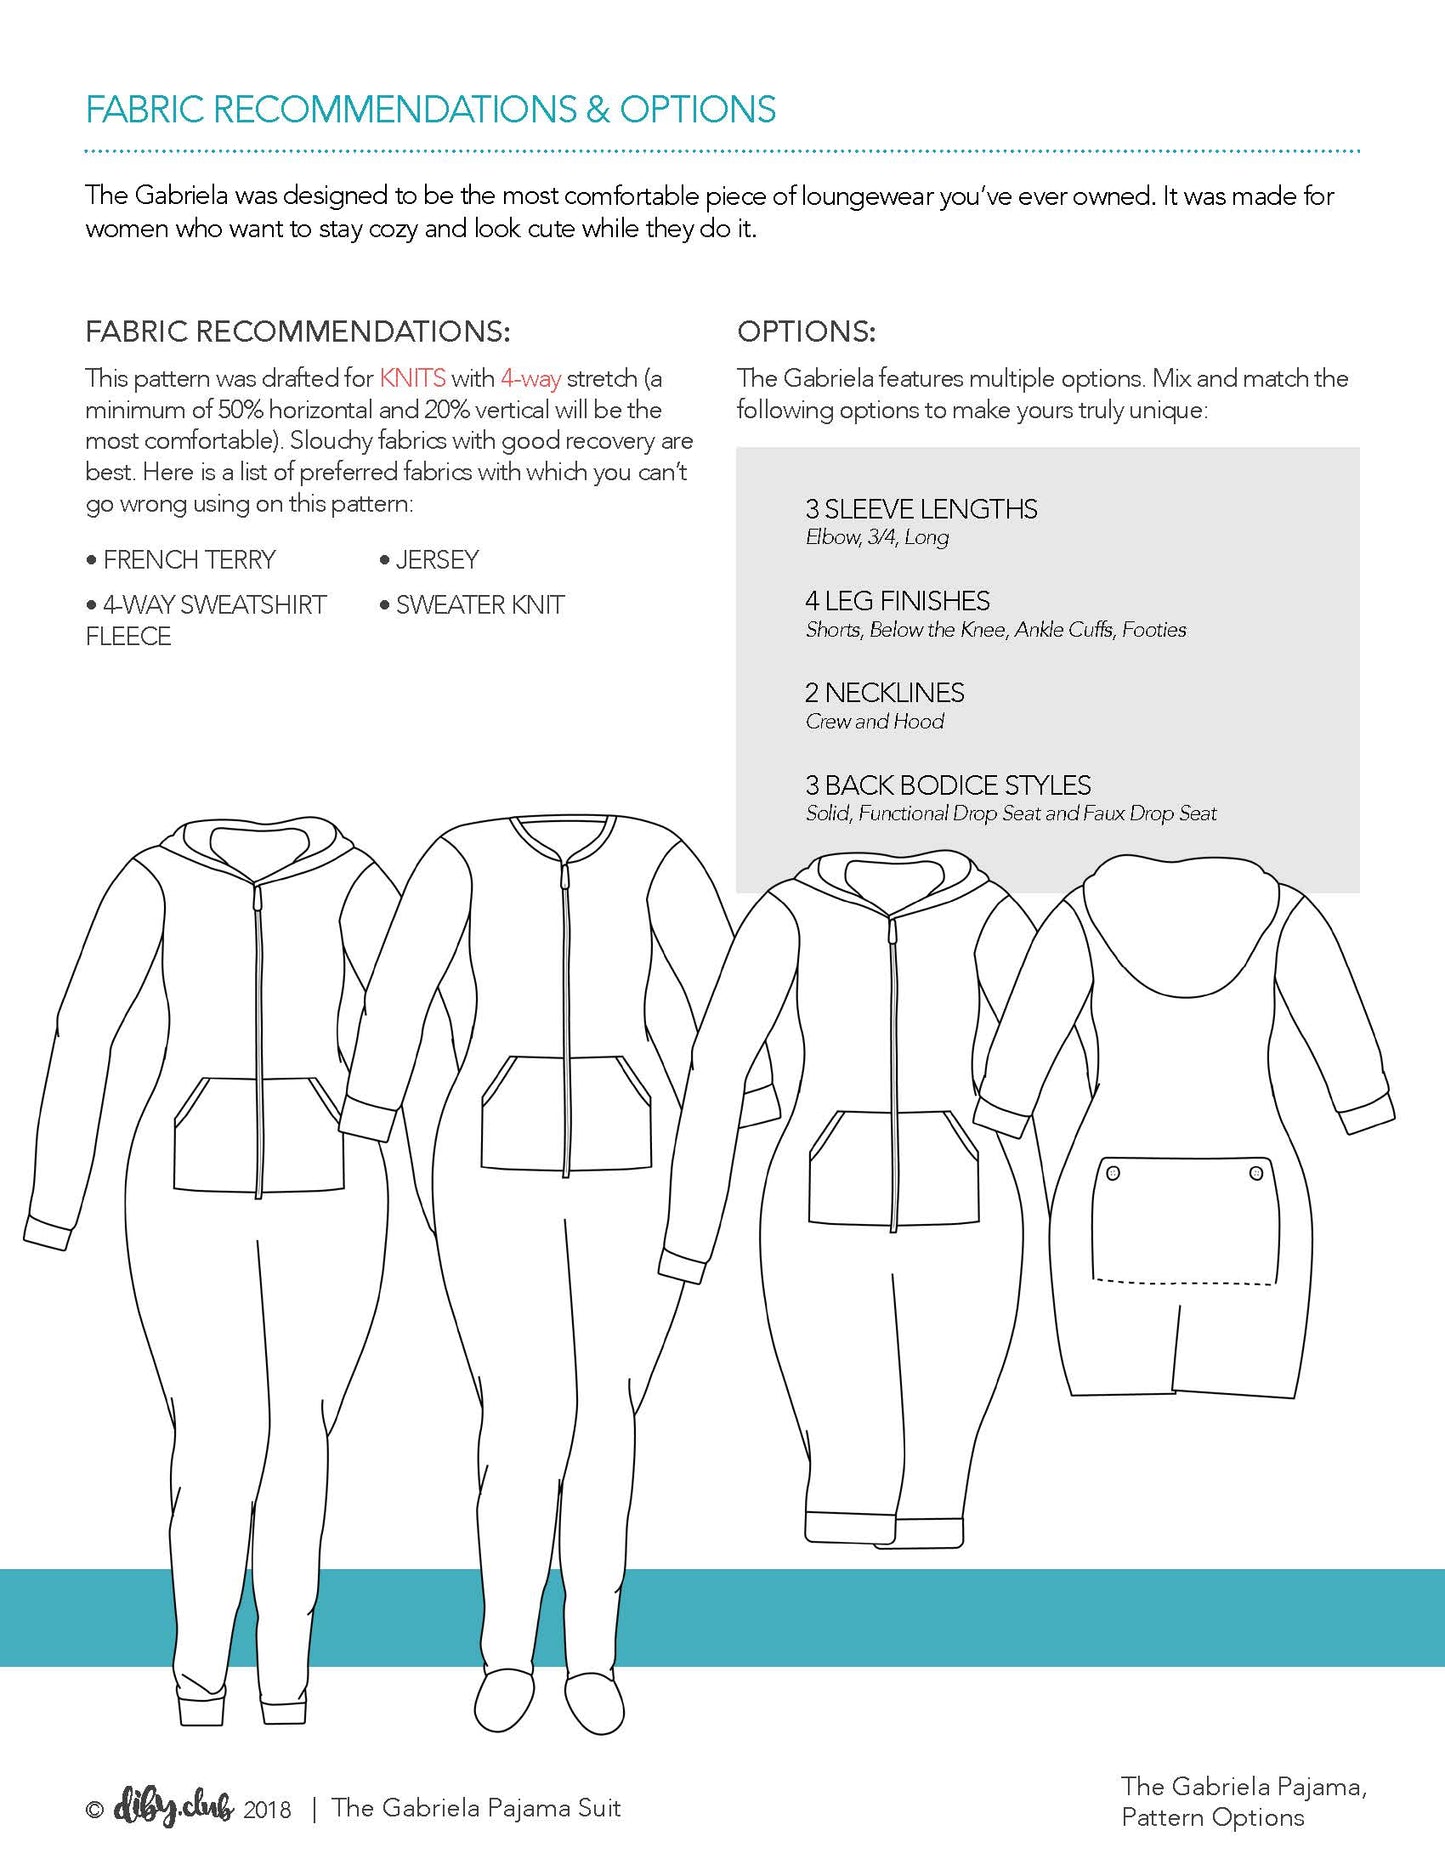 Image of the Fabric Recommendations and Options Page from the Instructions. The pattern was drafted for knits with 4-way stretch (at least 50% horizontal and 25% vertical). Suitable fabrics include french terry, 4-way sweatshirt fleece, jersey, or sweater knits.